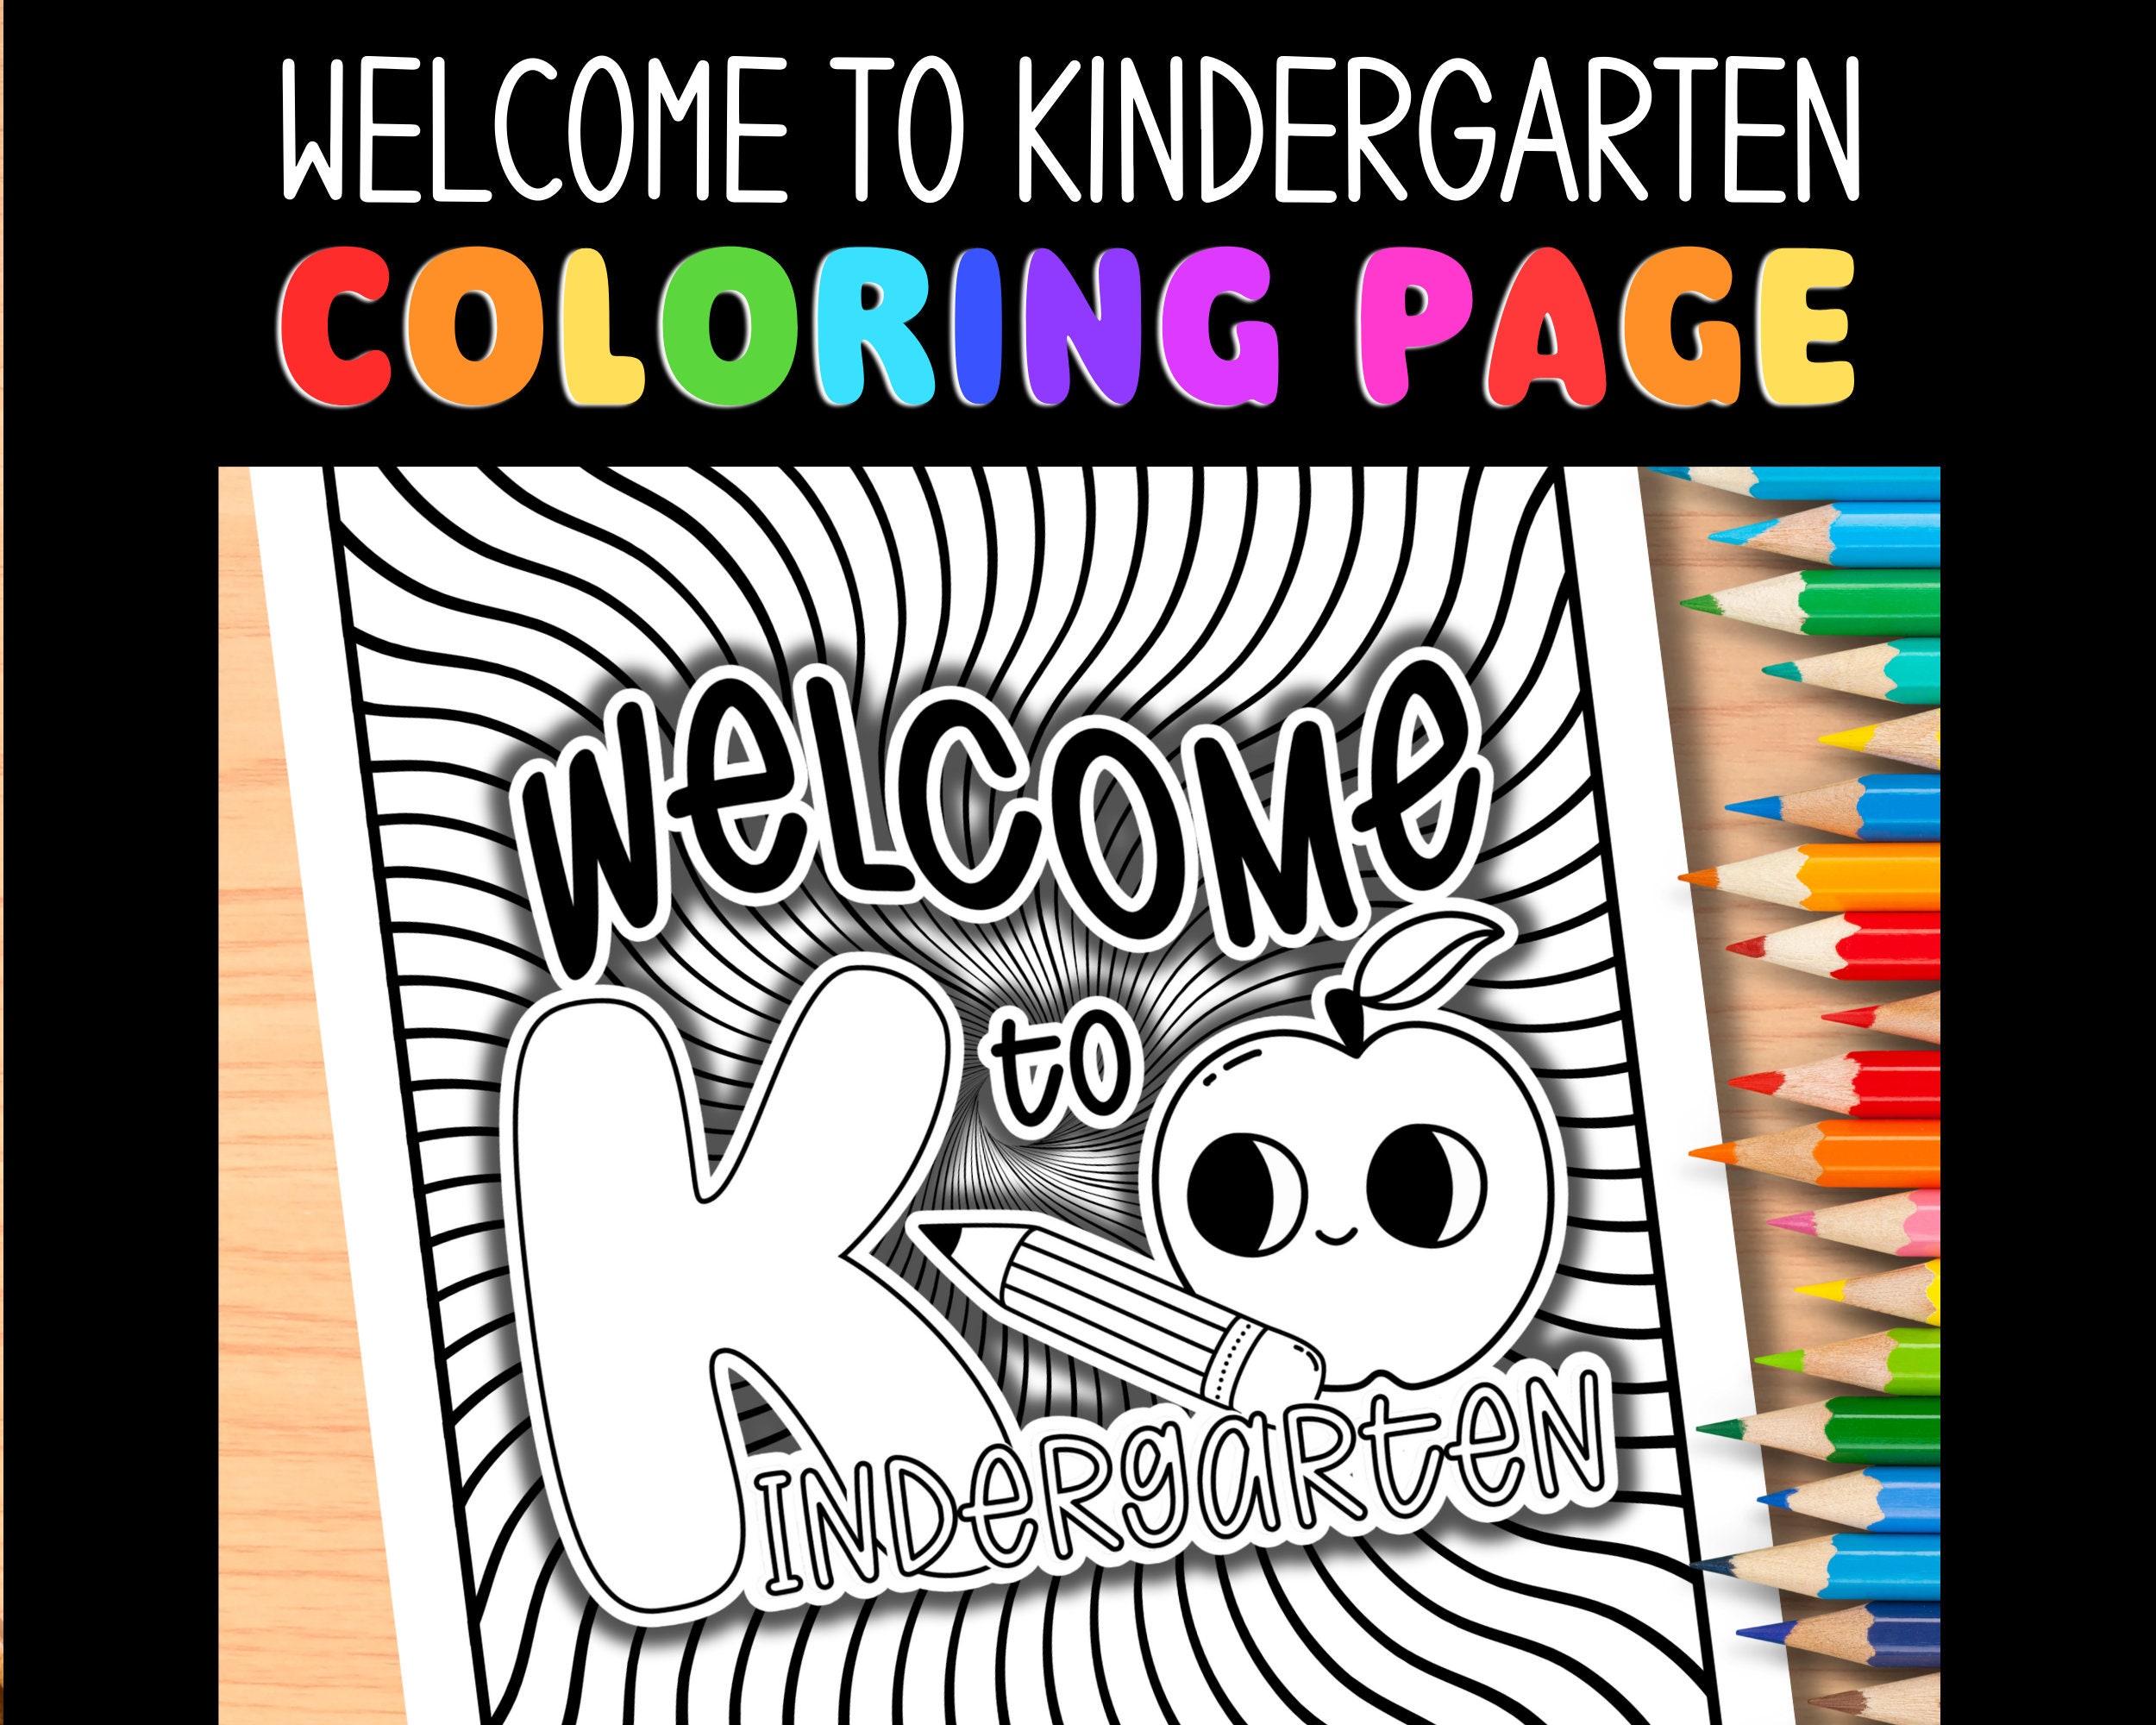 Wele to kindergarten coloring page back to school open house teacher printables